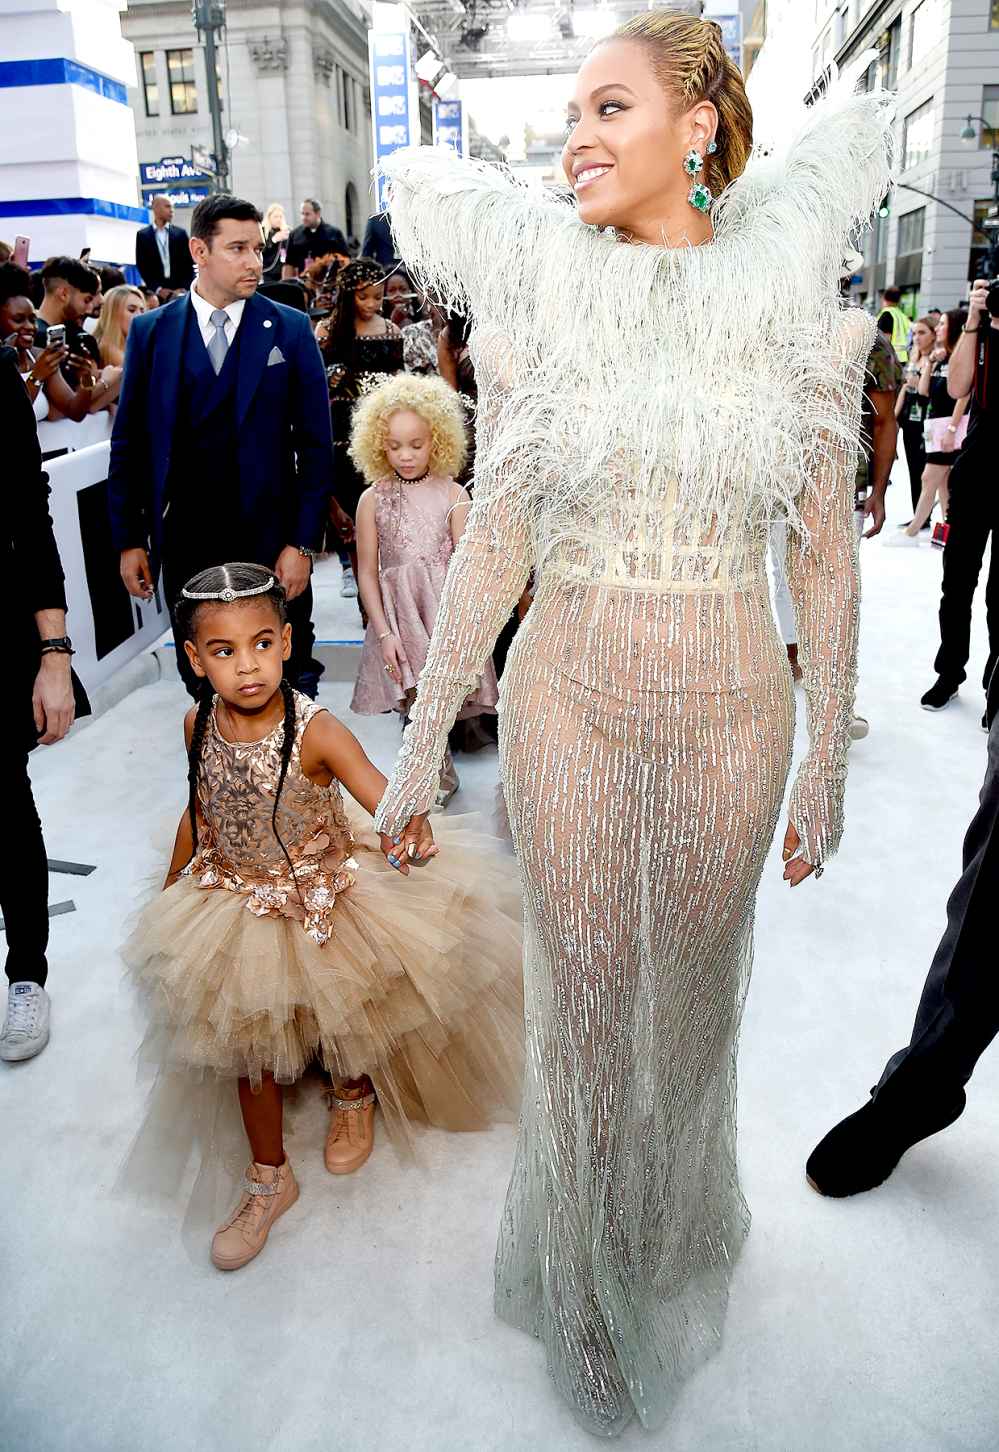 Beyonce and daughter Blue Ivy Carter attend the 2016 MTV Video Music Awards at Madison Square Garden on August 28, 2016 in New York City.